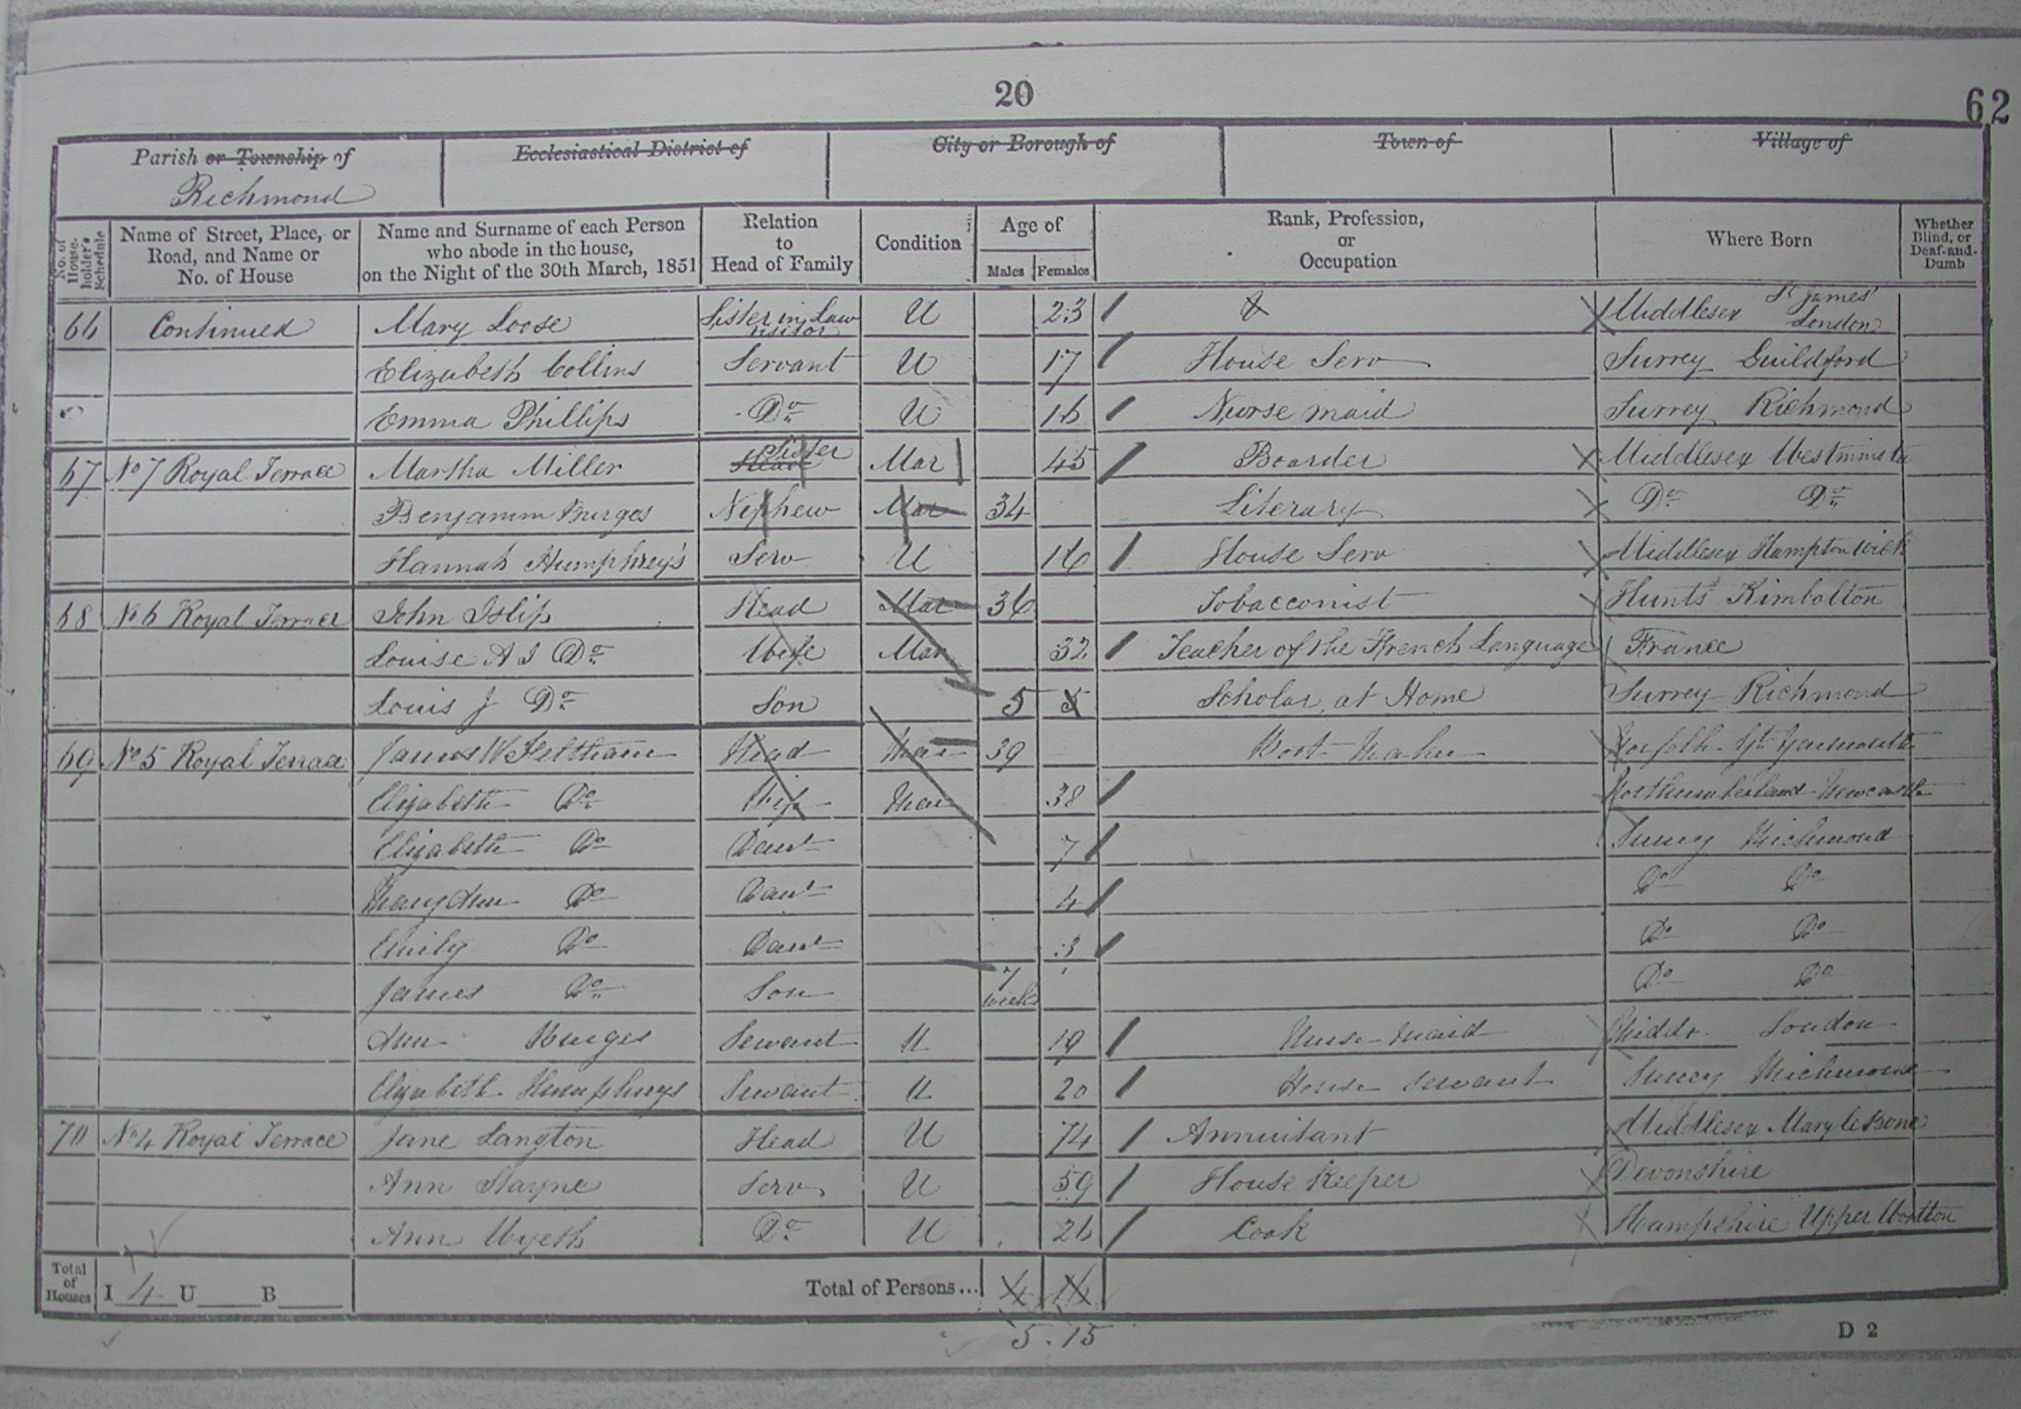 1851 census return for 4-7 Royal Terrace. Please click here for a larger image.